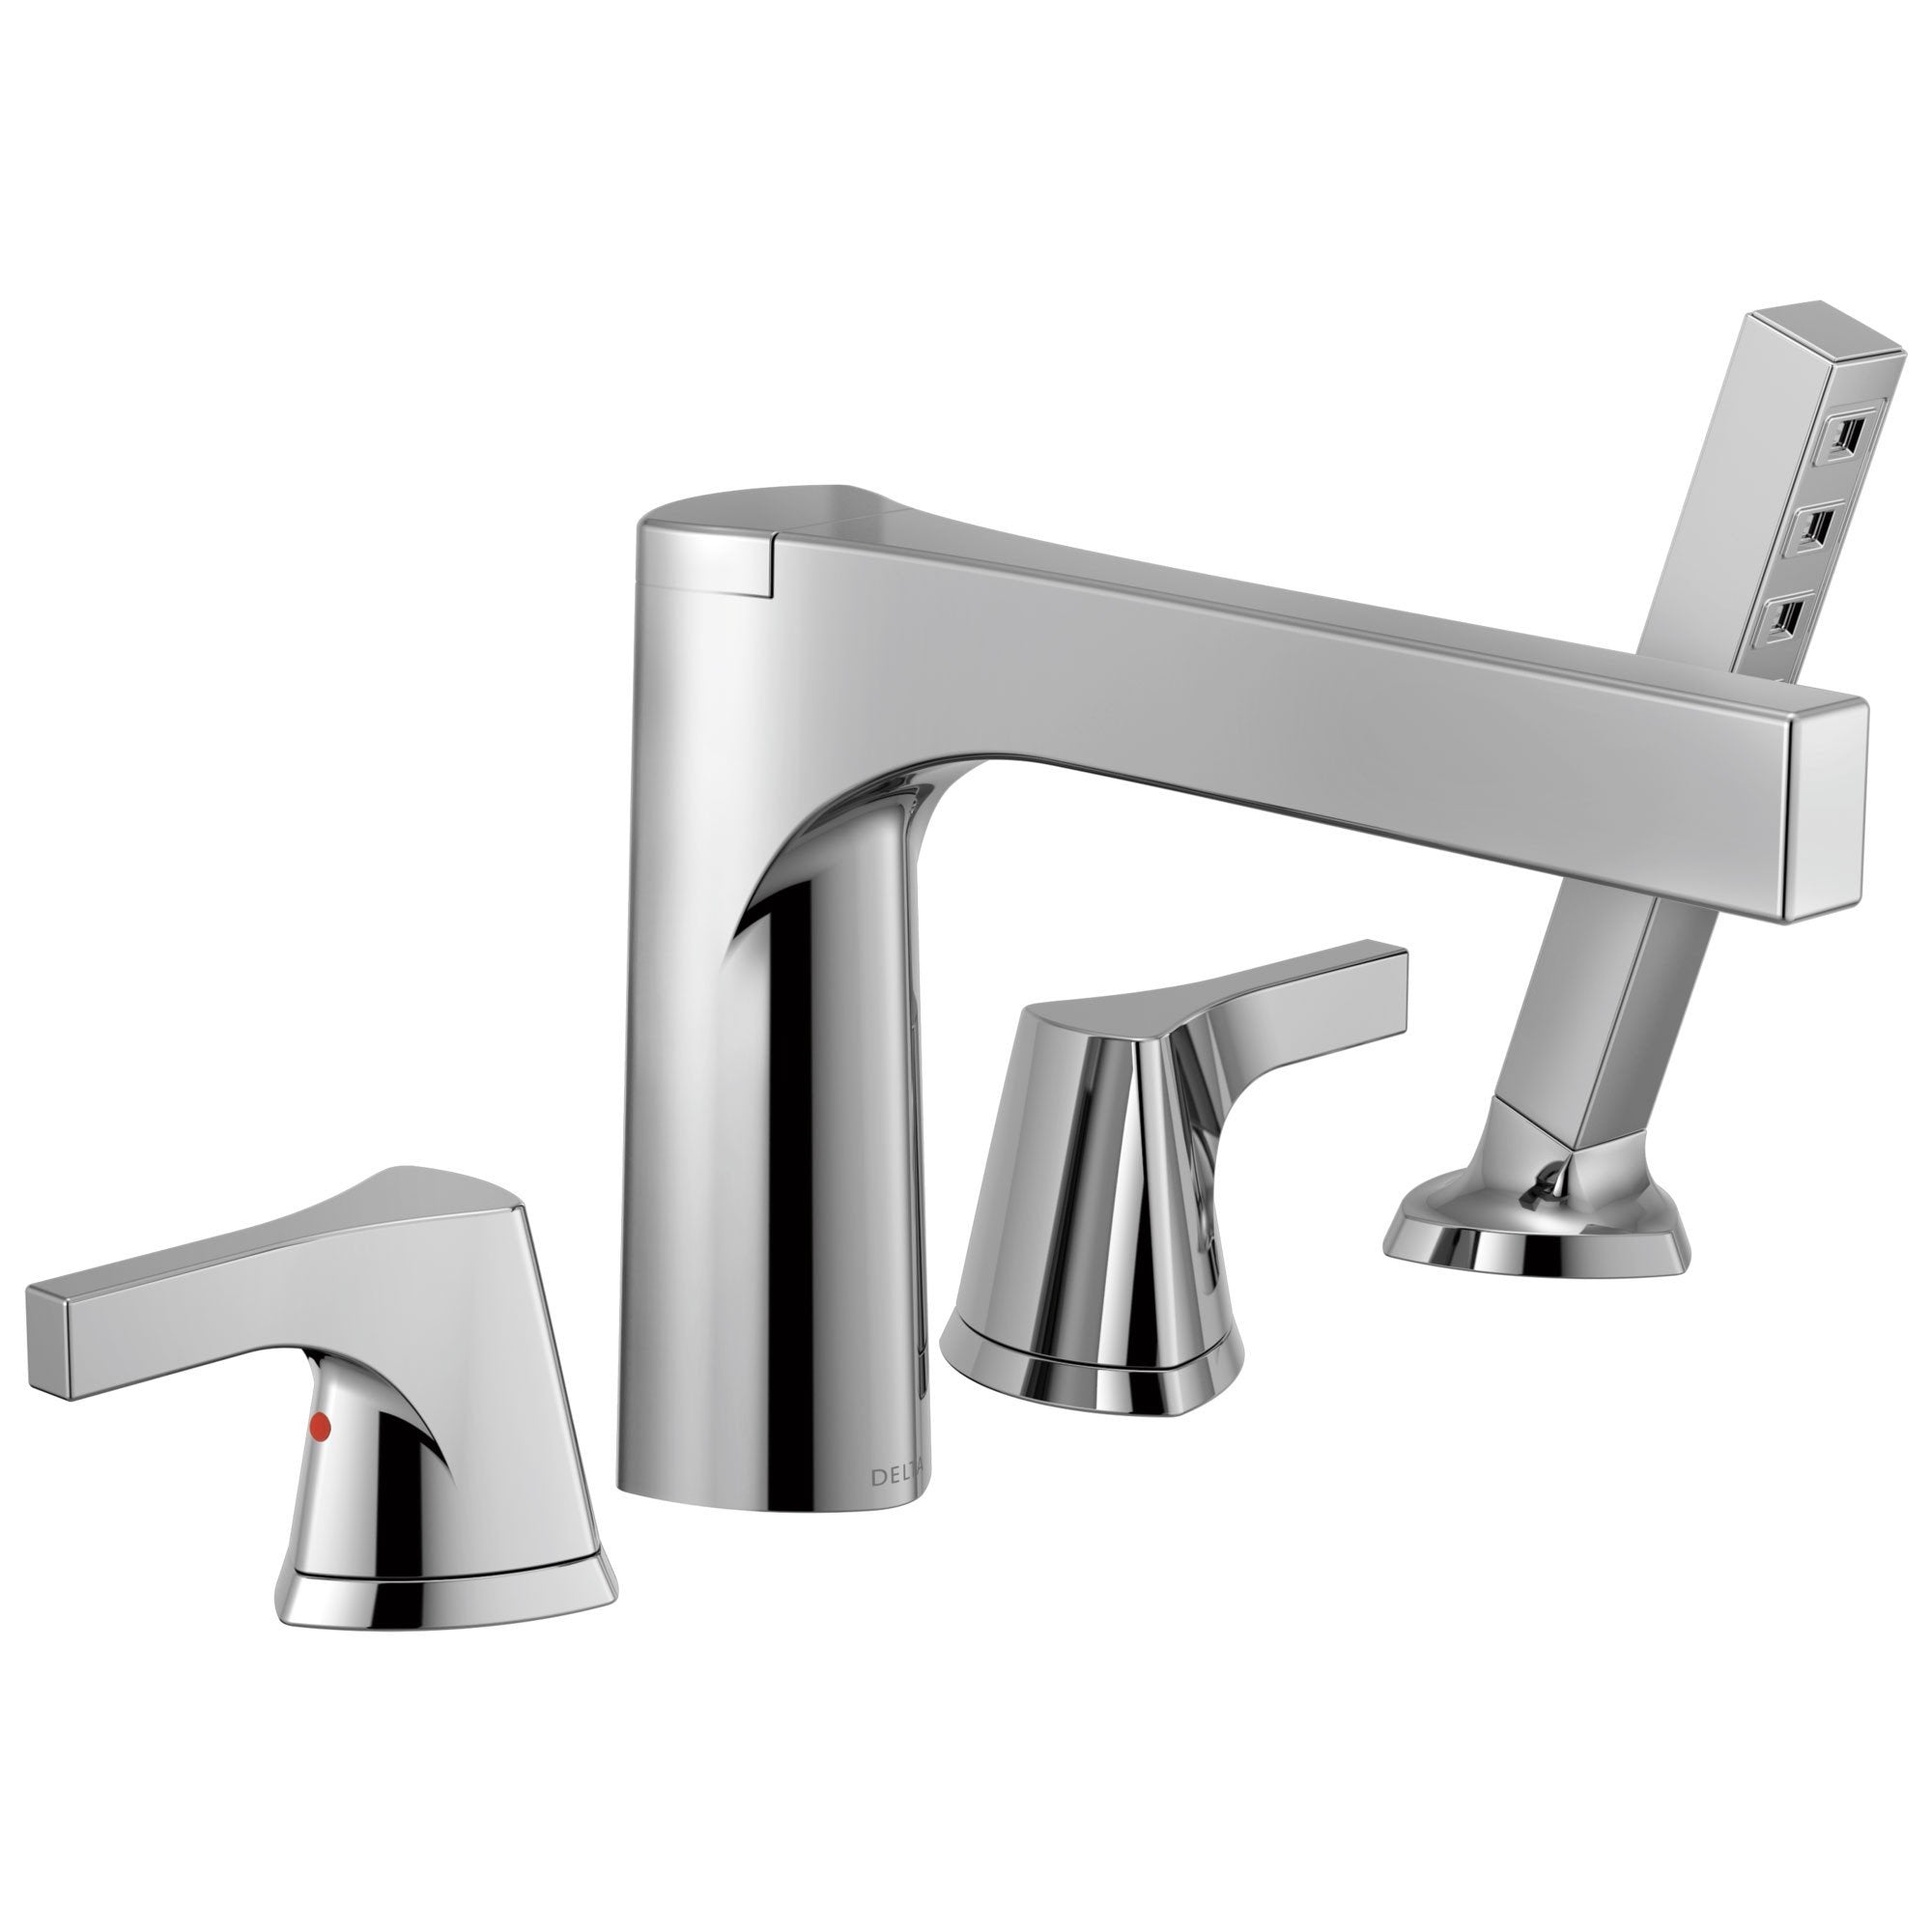 Delta Zura Collection Chrome Finish 4-Hole Roman Tub Filler Faucet with Hand Shower Trim Kit (Rough in Valve Sold Separately) 743936